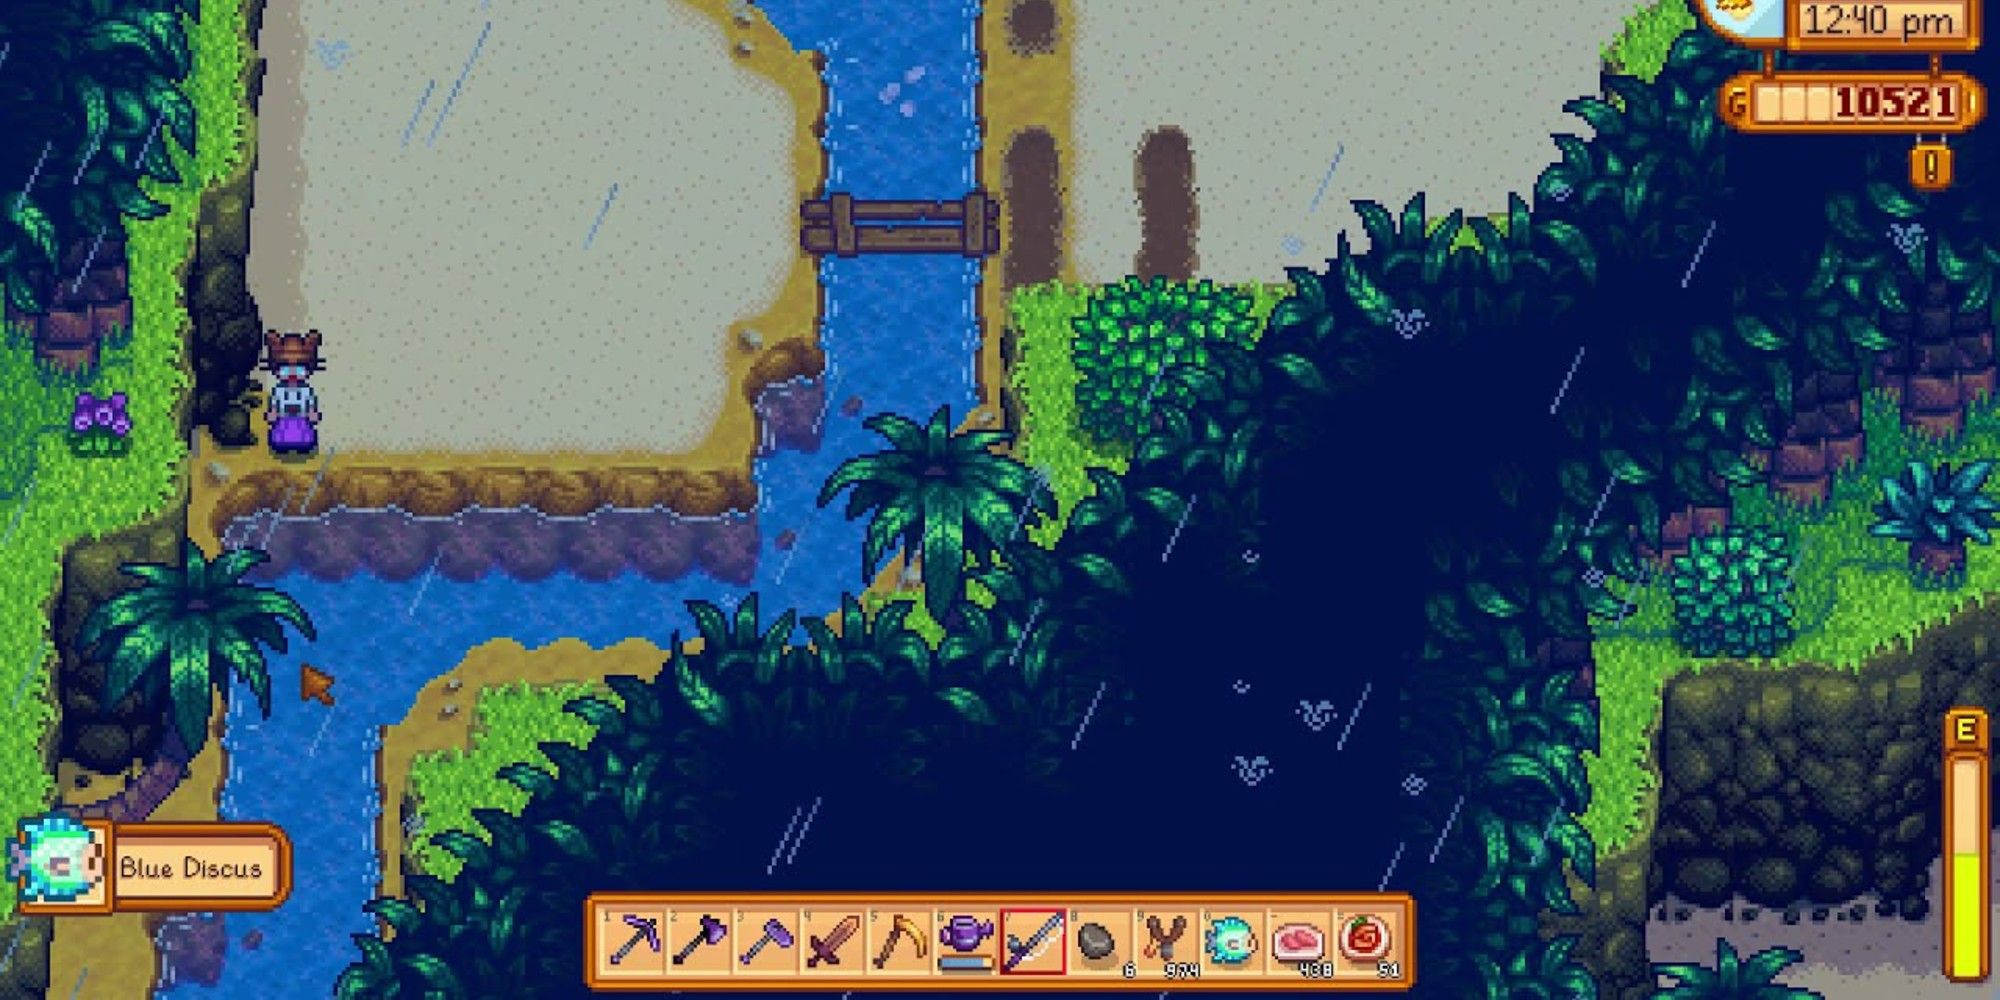 player standing near Ginger Island River, catching a blue discus